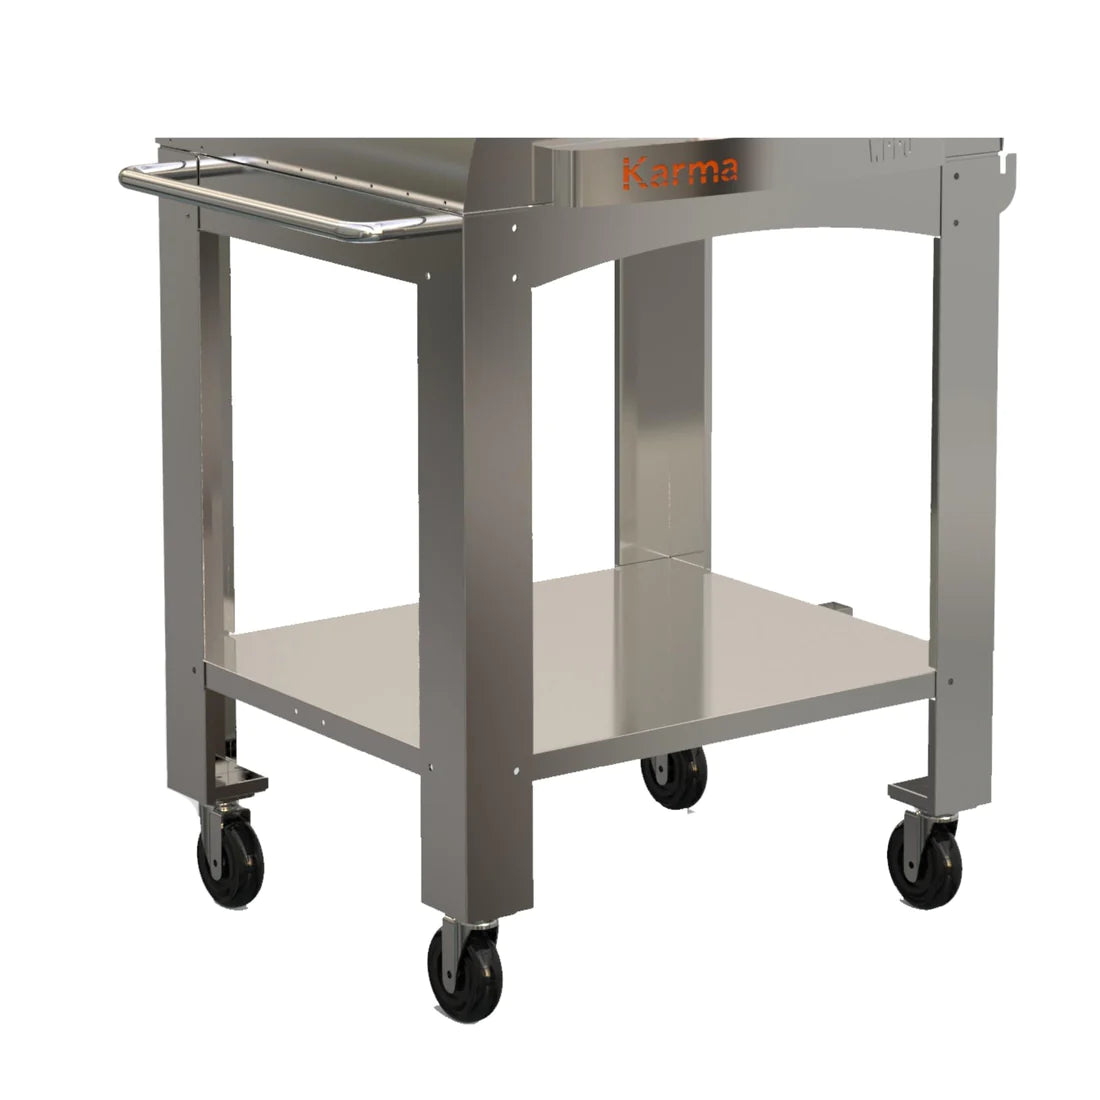 WPPO Karma 42 Stand Cart Only - Smart Nature Store